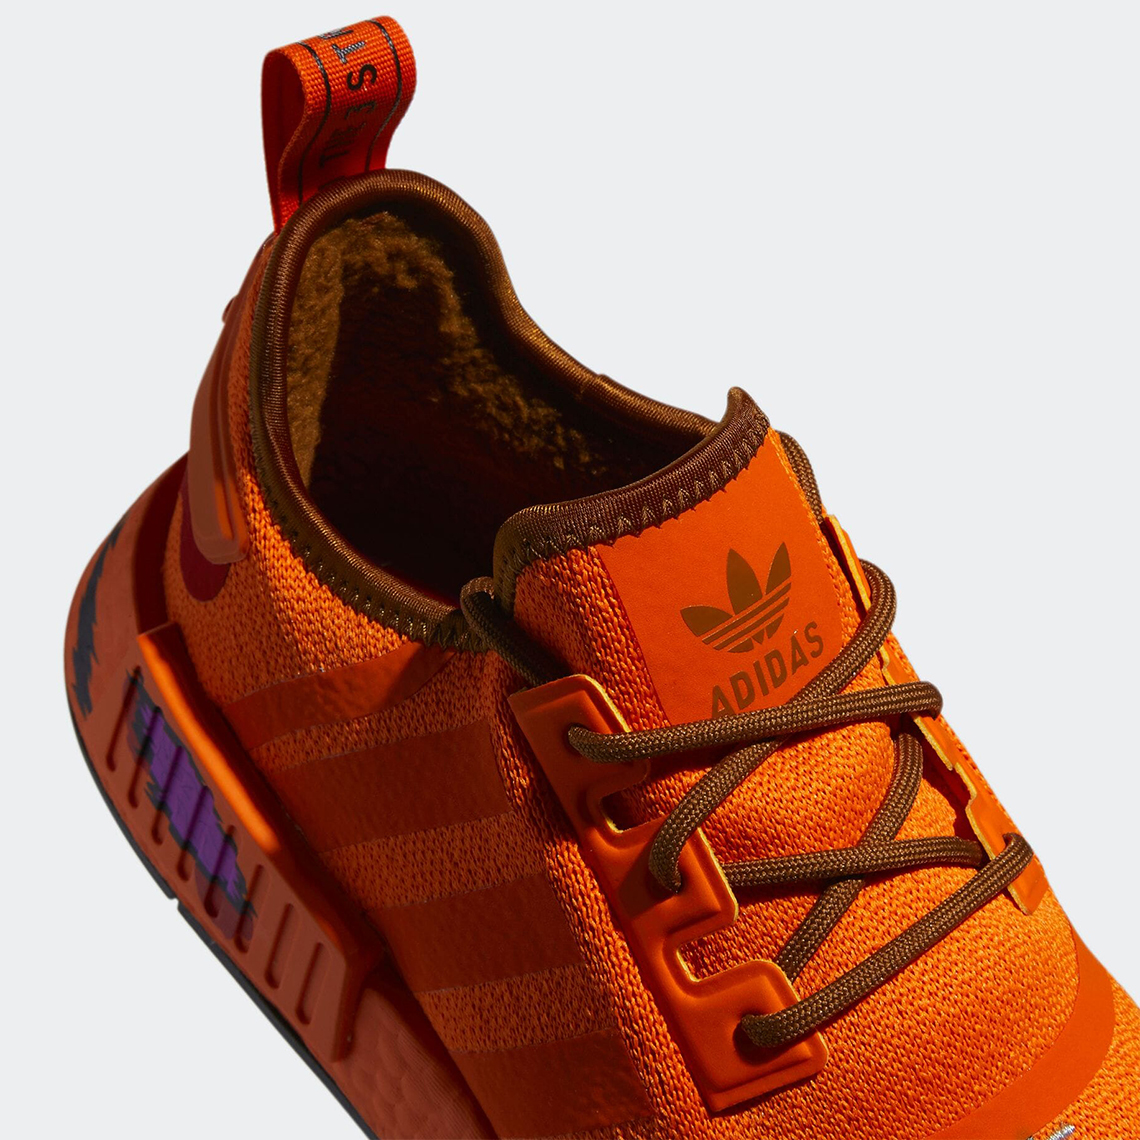 South Park Adidas Nmd R1 Kenny Gy6492 Release Date 3